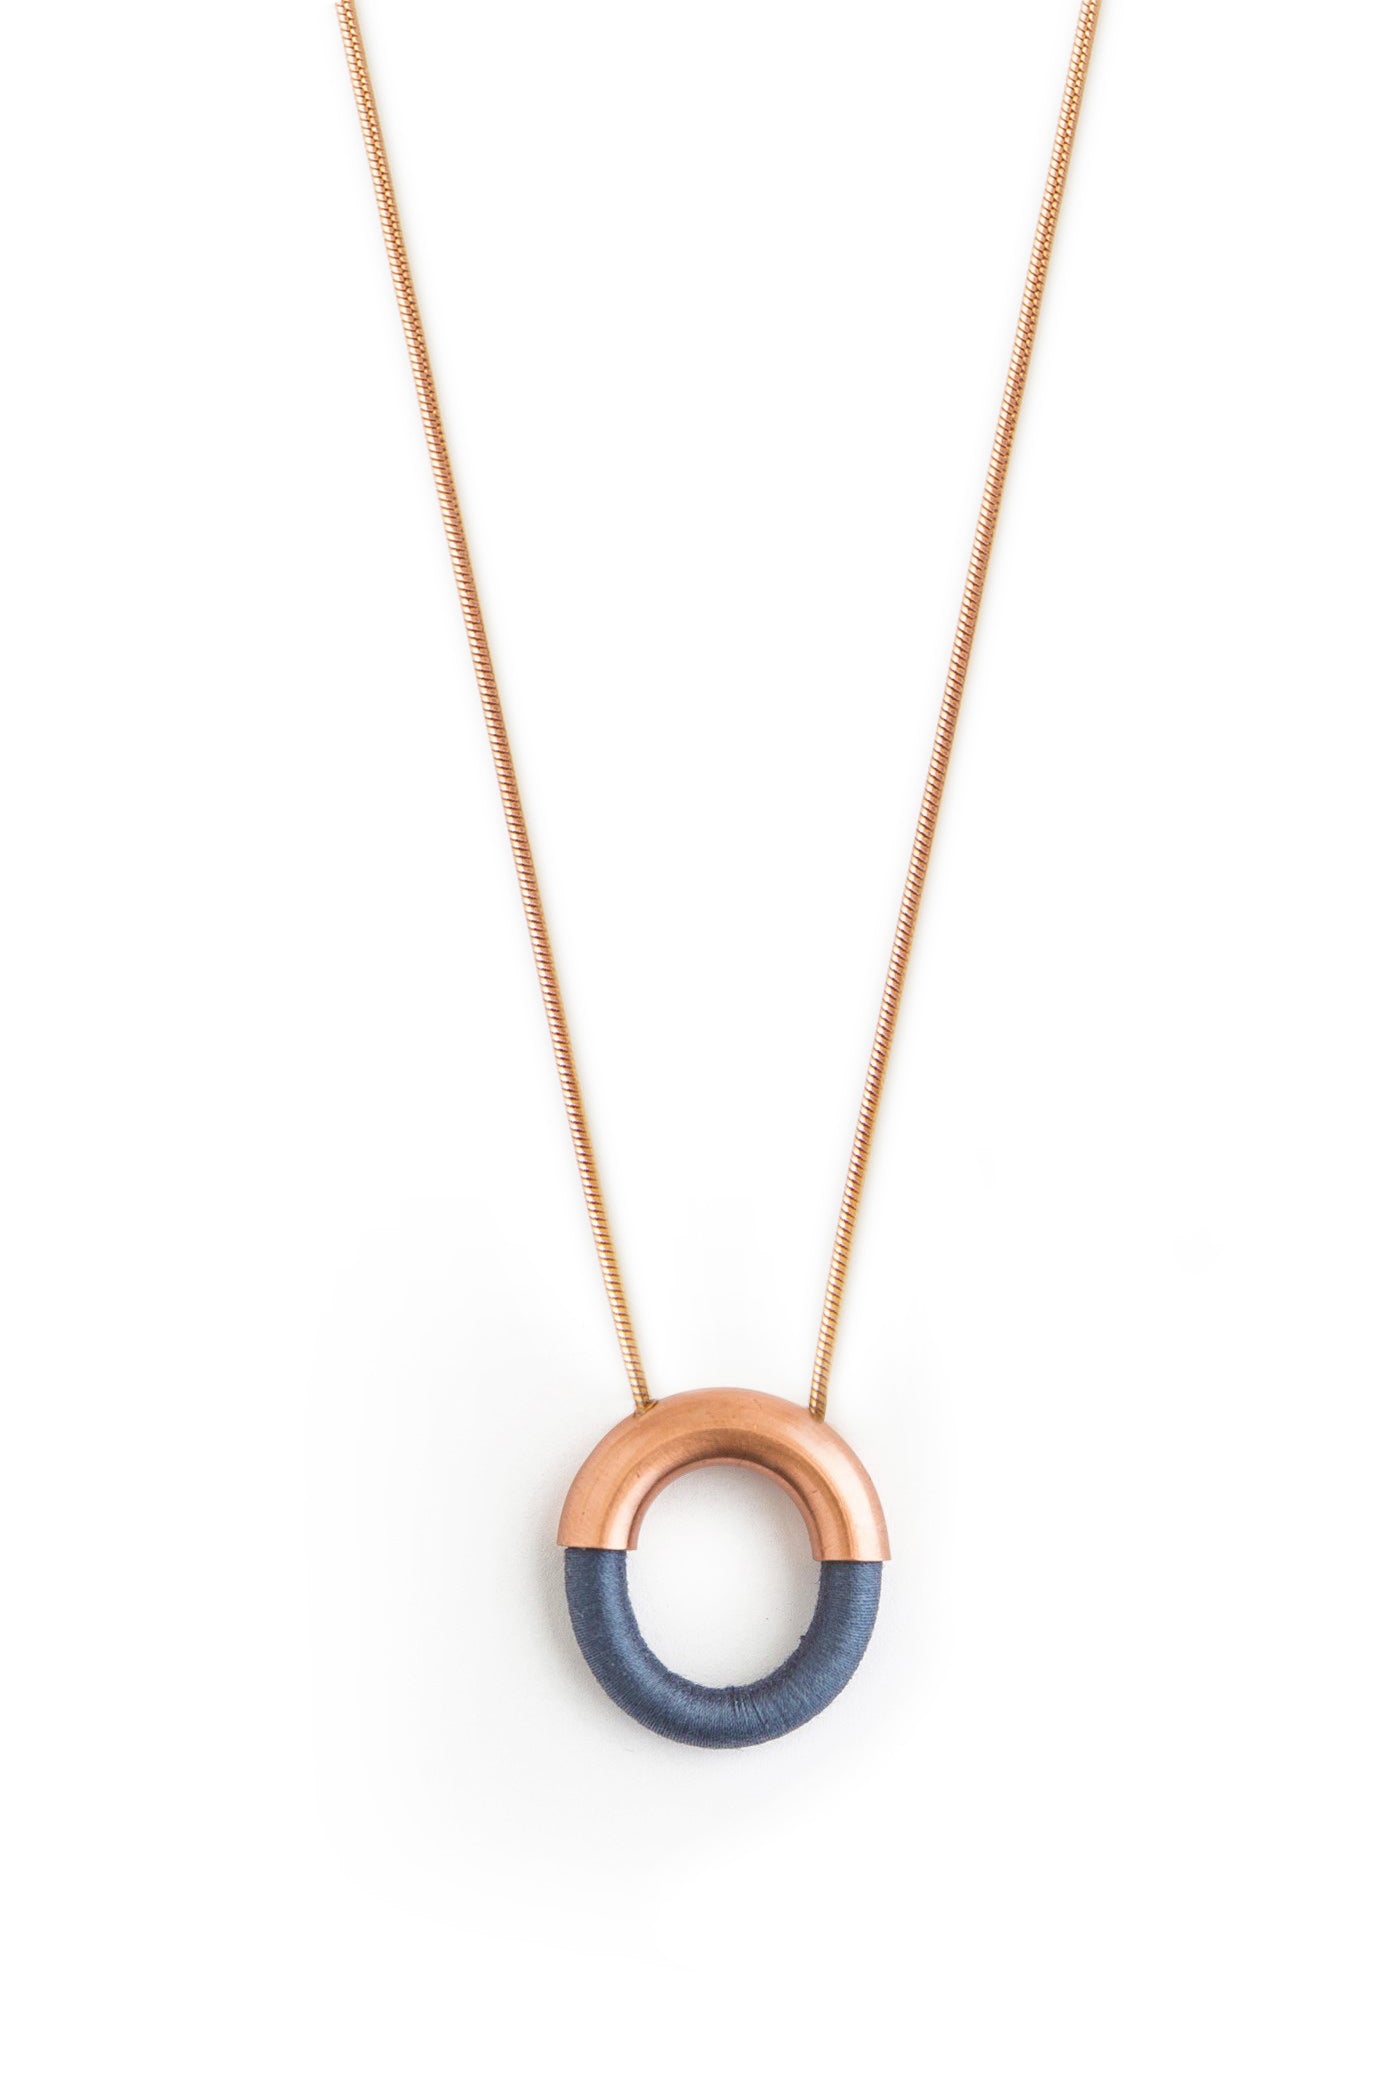 OKO necklace N°1